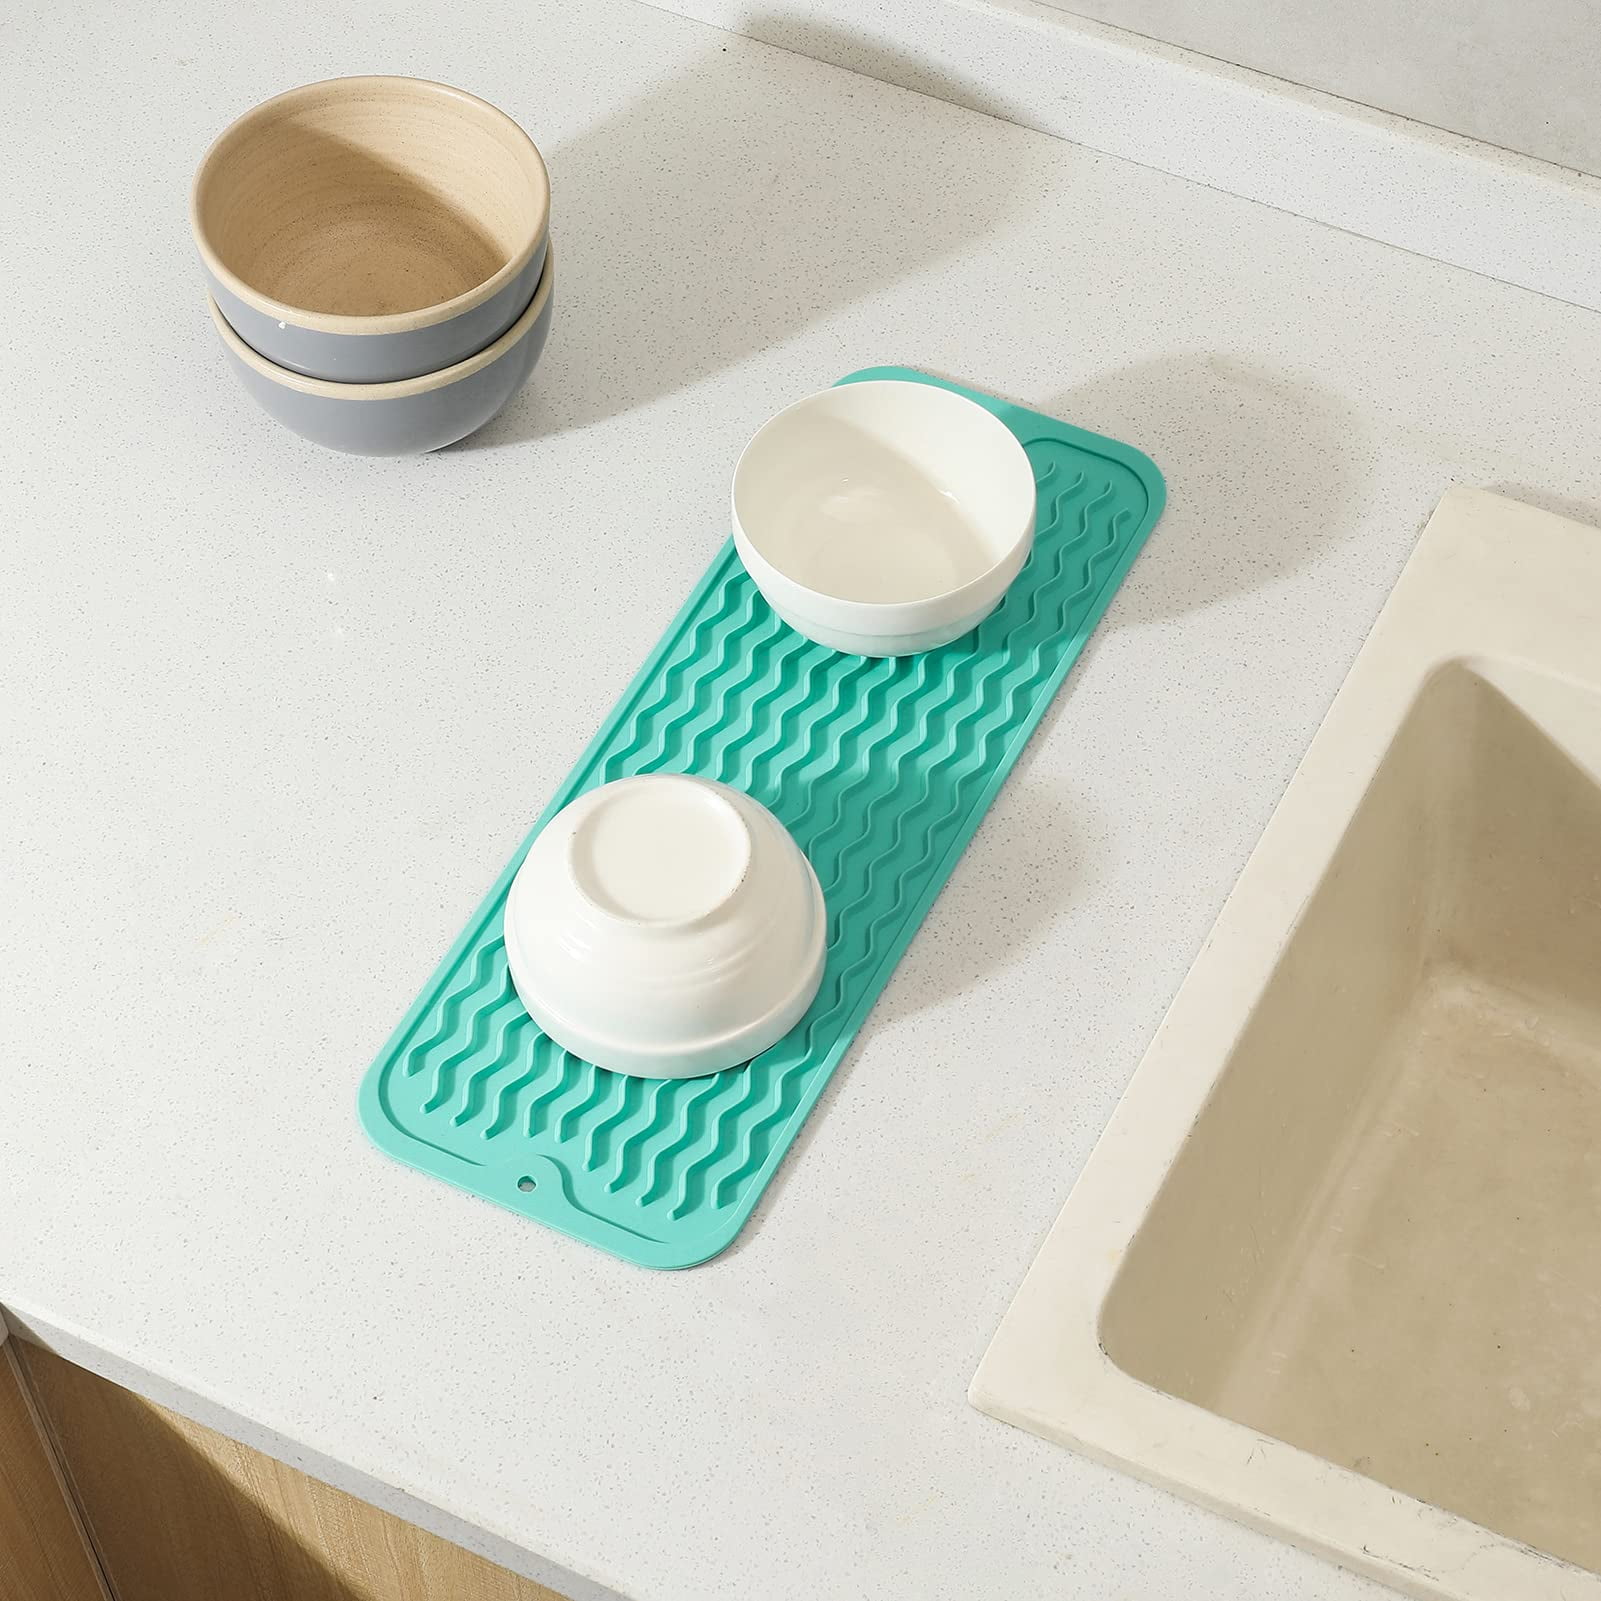 Kitchen Drying Mat (2-Piece Silicone) – The Better House